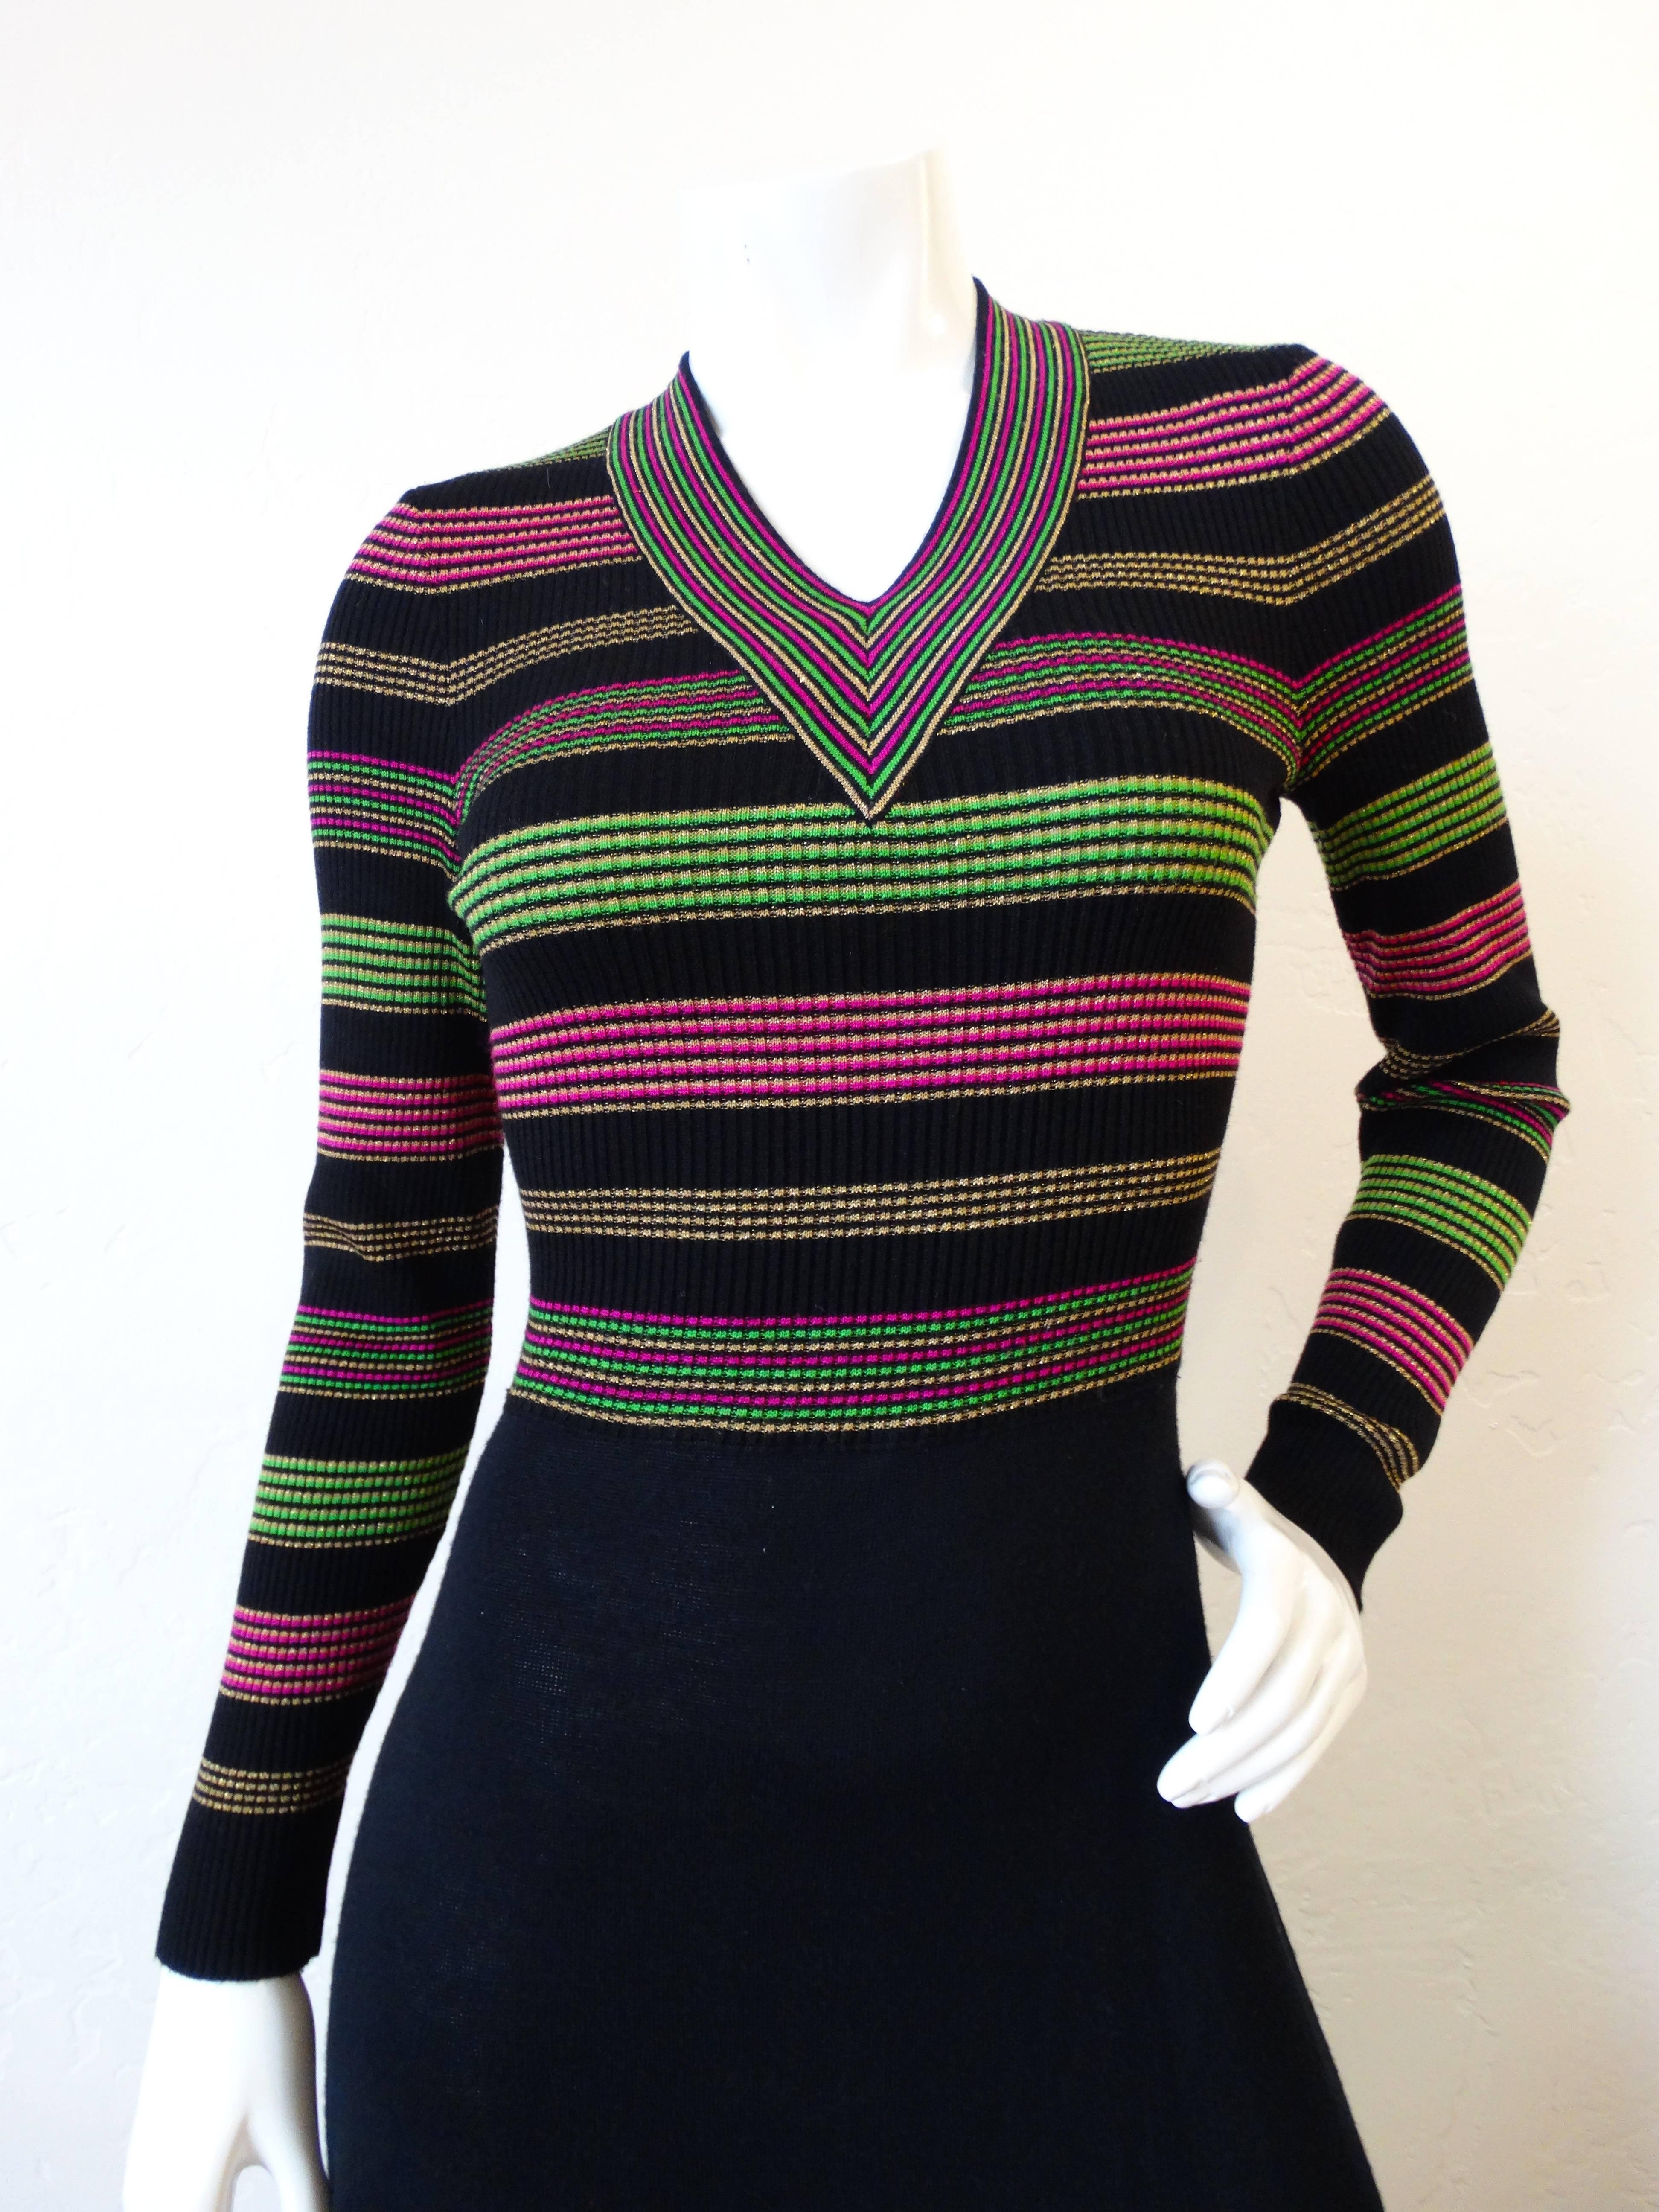 Channel the spirit of the 1970s with our adorable Saks Fifth Avenue lurex dress! Oh so 70s striped bodice woven from a metallic lurex knit in shades of gold, green and pink. Similar stripes on the hem of the skirt. Zips up the back, stretchy fabric